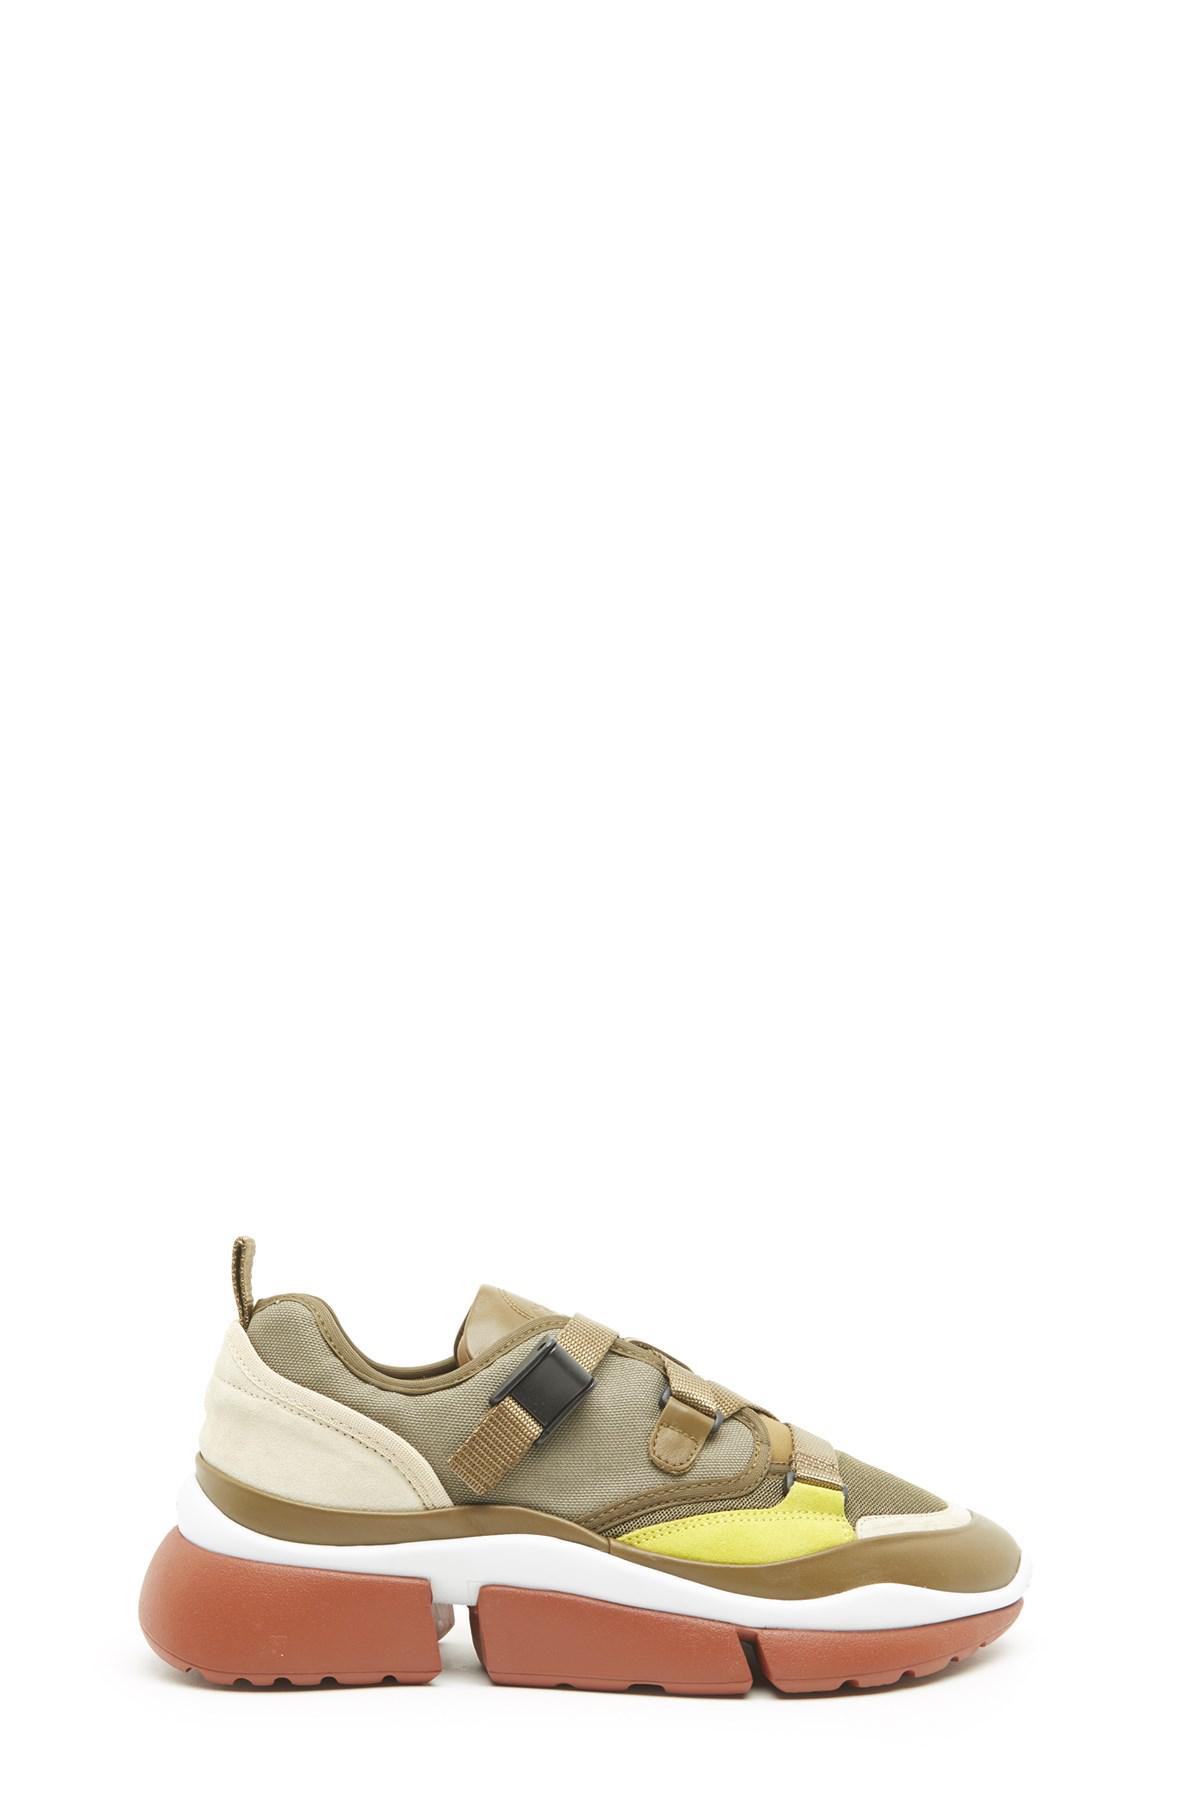 Chloé Sonnie Canvas, Mesh, Suede And Leather Sneakers in Green | Lyst